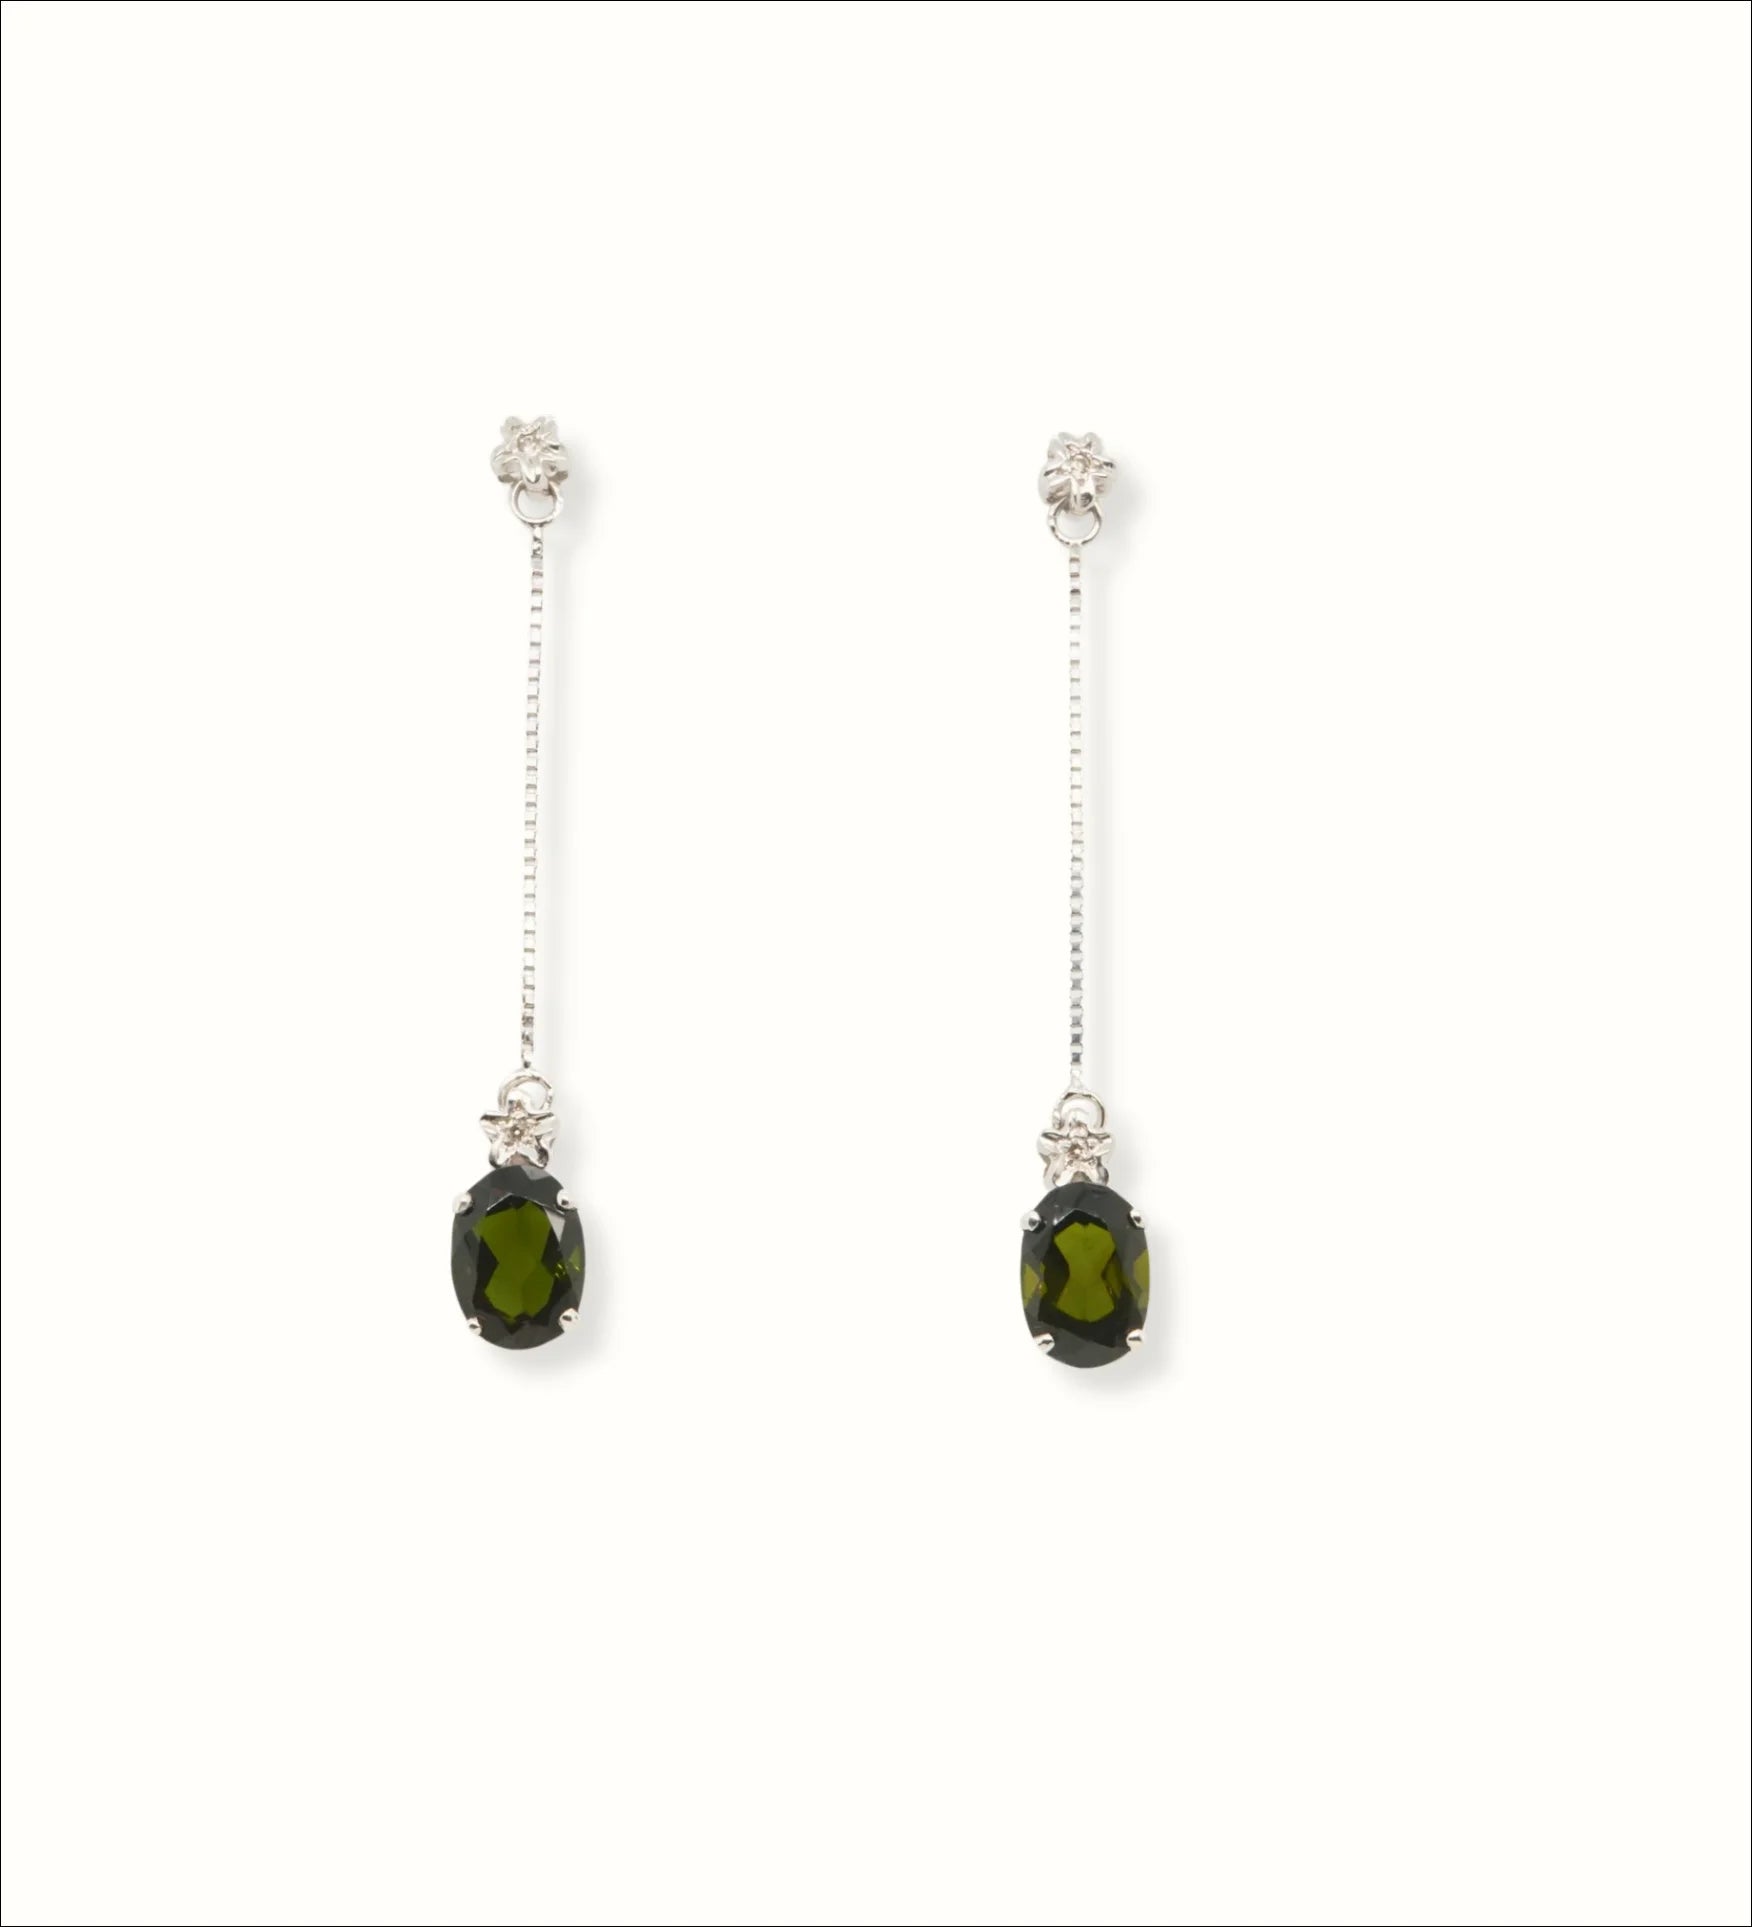 Exquisite Creation: 18k White Gold Earrings with Green